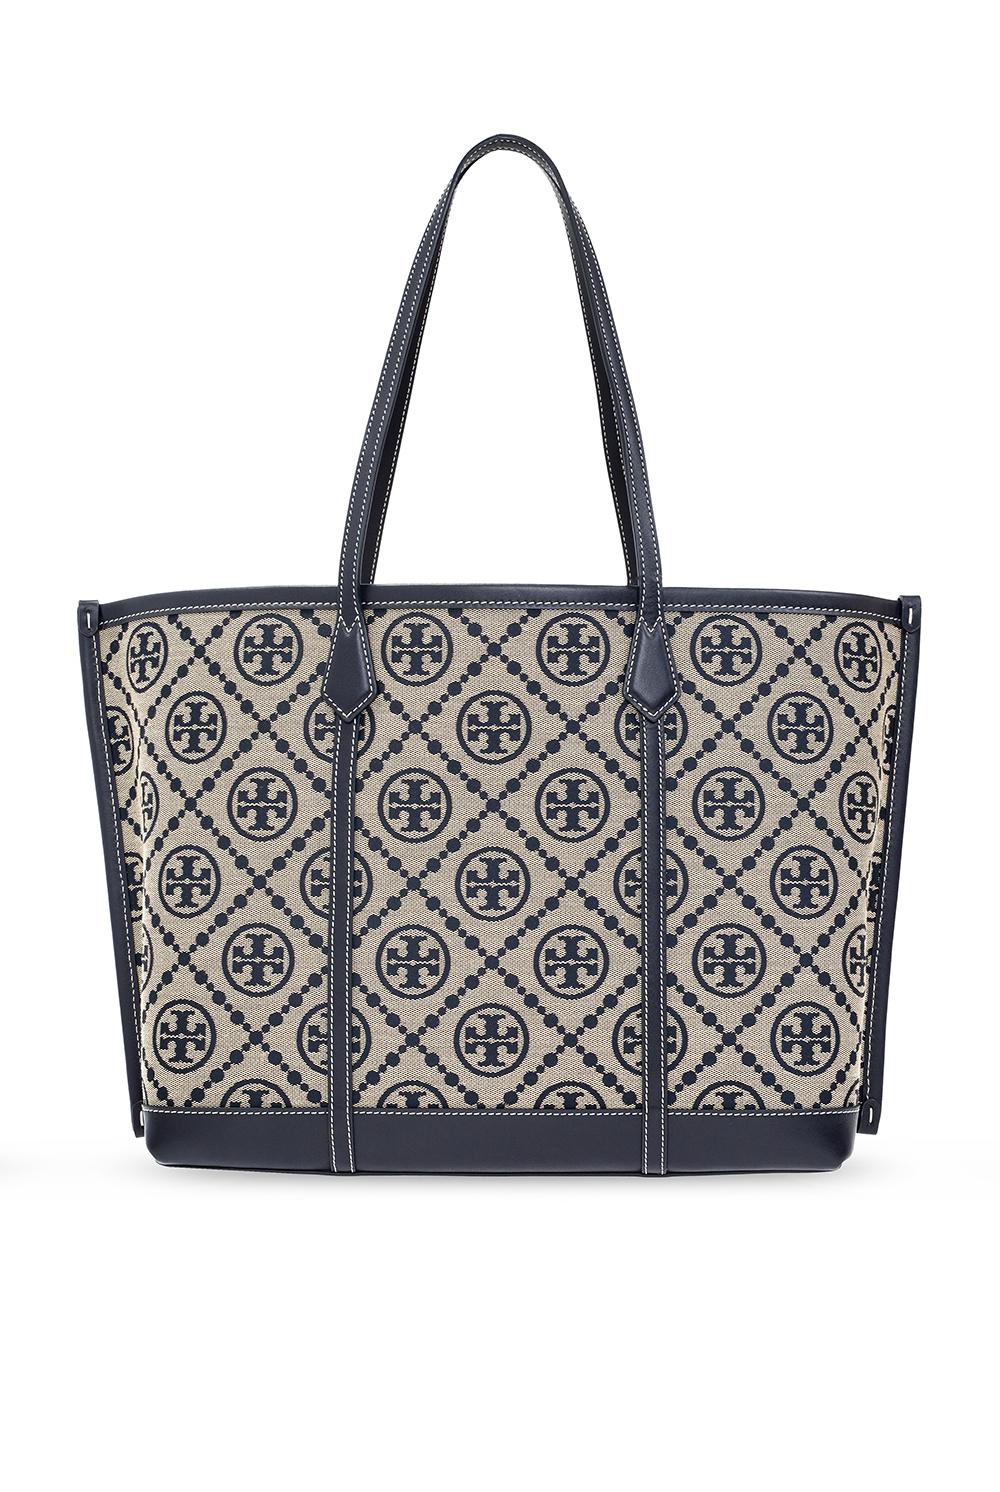 Tory Burch Perry T Monogram Triple-compartment Tote in Blue,Beige 